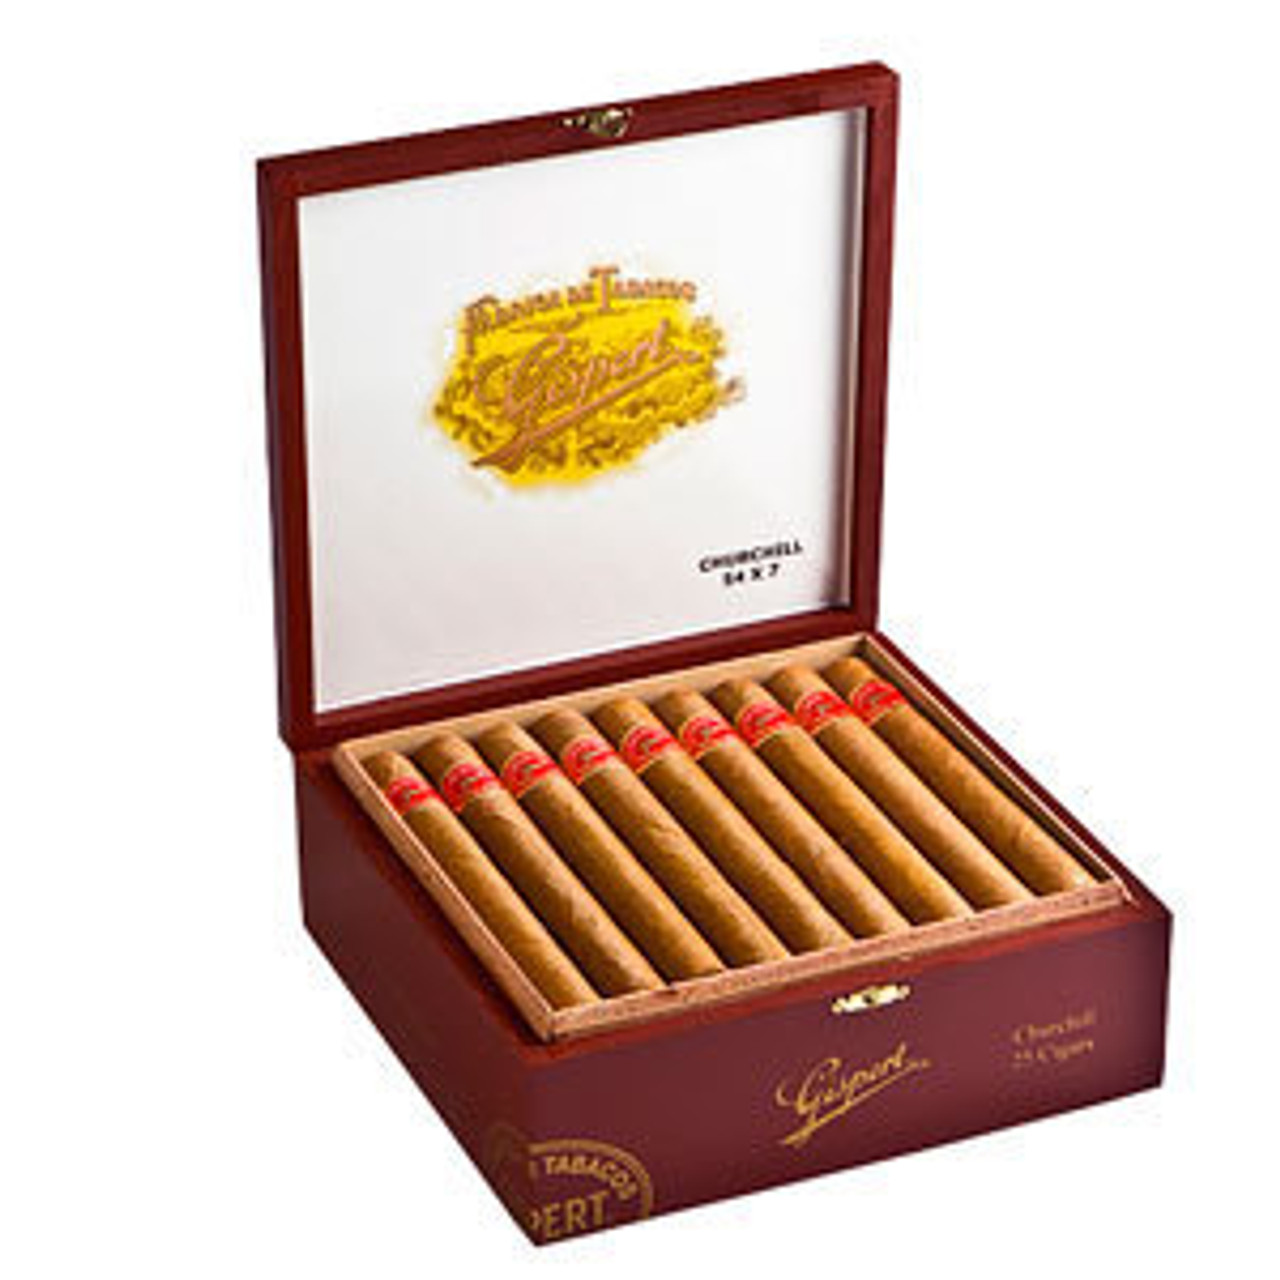 Gispert Belicoso Natural Cigars - 6.12 x 52 (Pack of 5) *Box